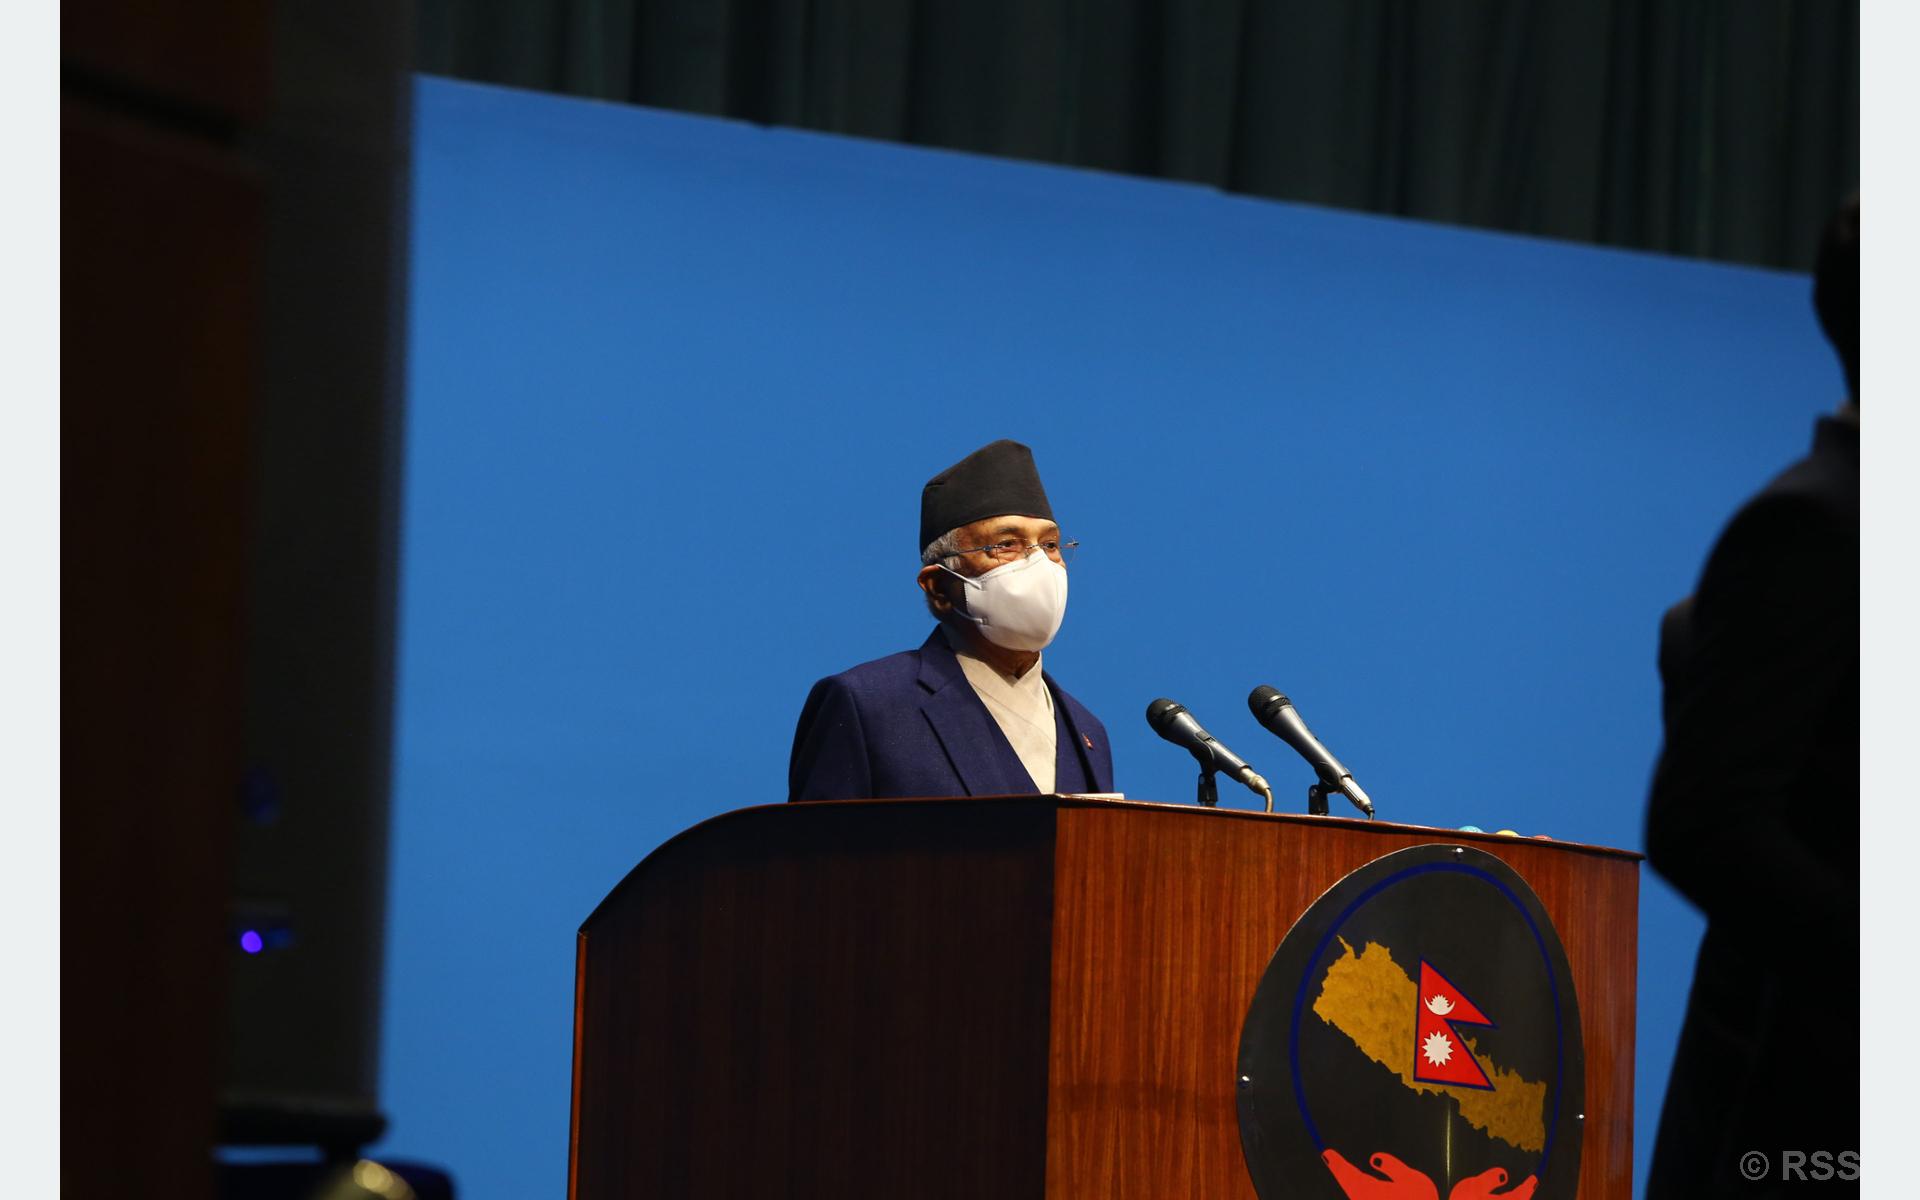 High time we all moved together on the basis of consensus, unity and mutual understanding: PM Oli